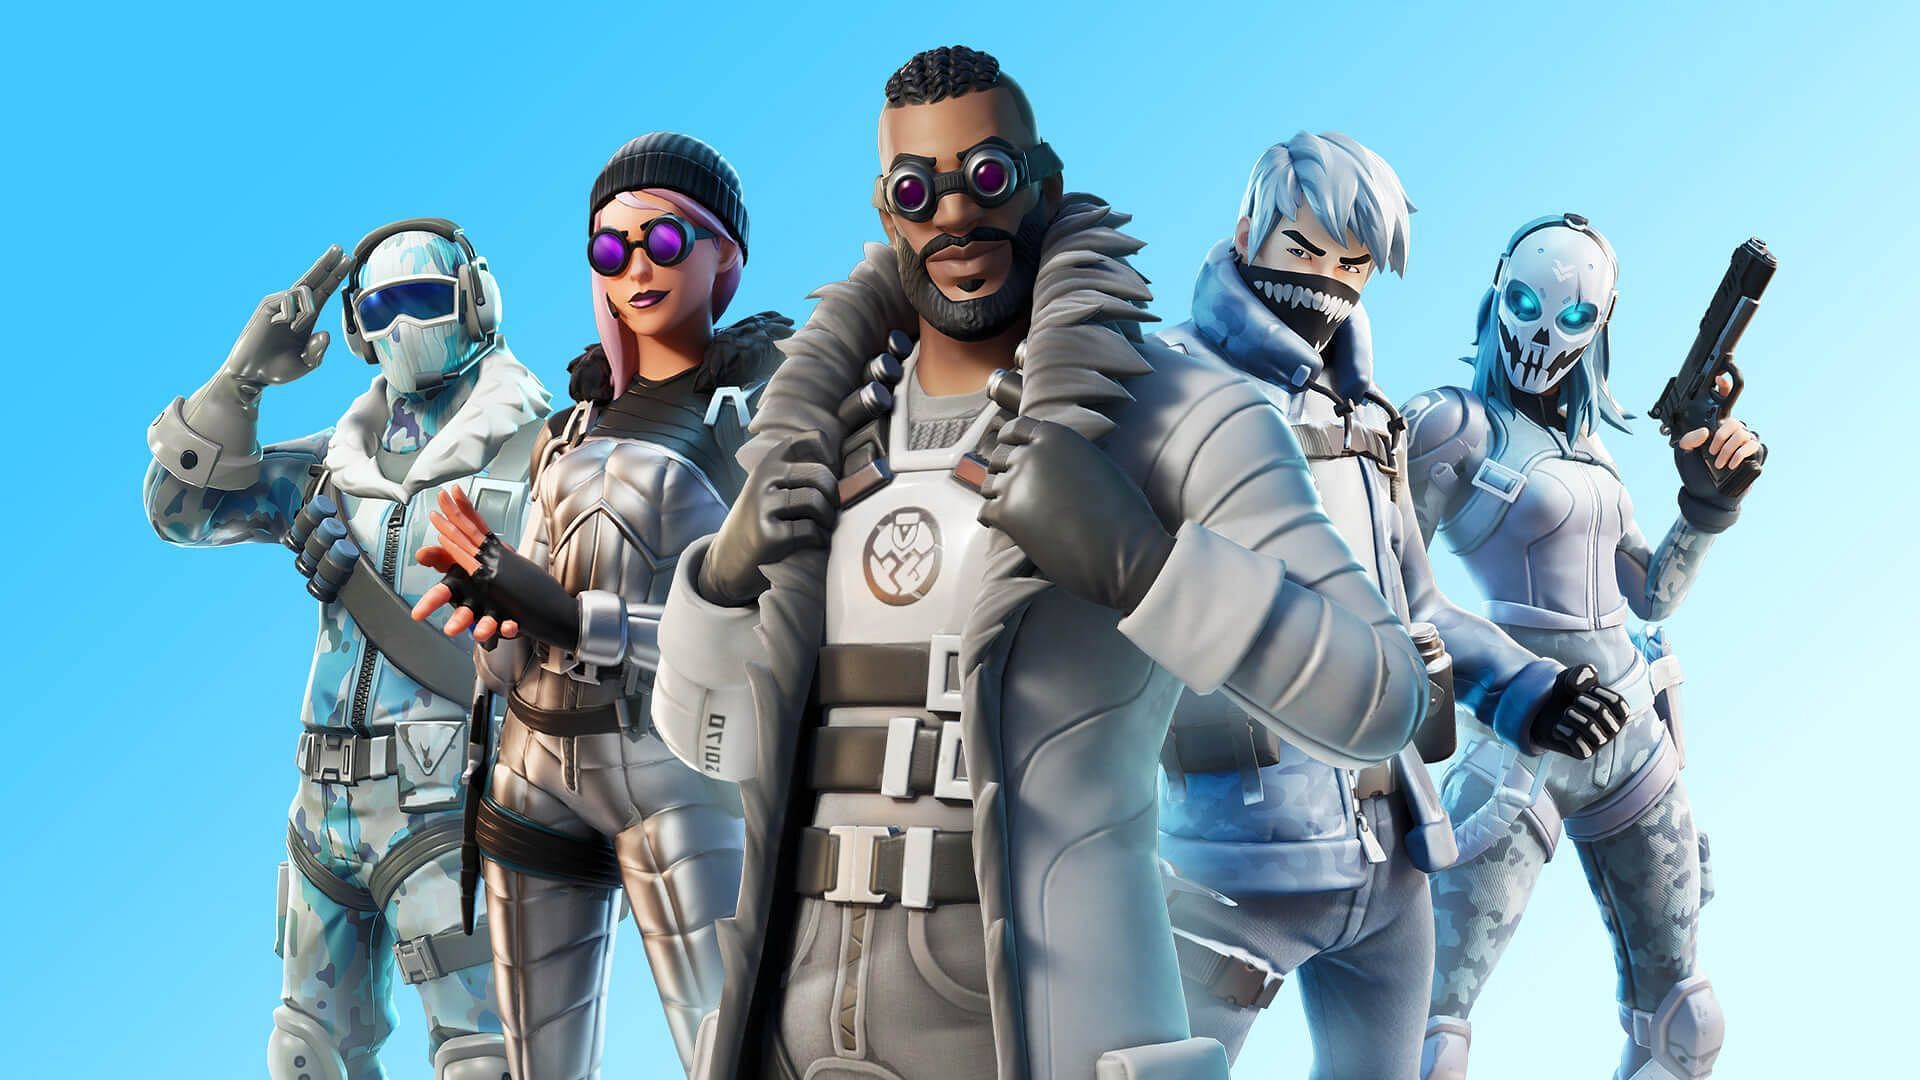 Top 5 Winter Themed Fortnite Skins Fans Would Love To See This Christmas